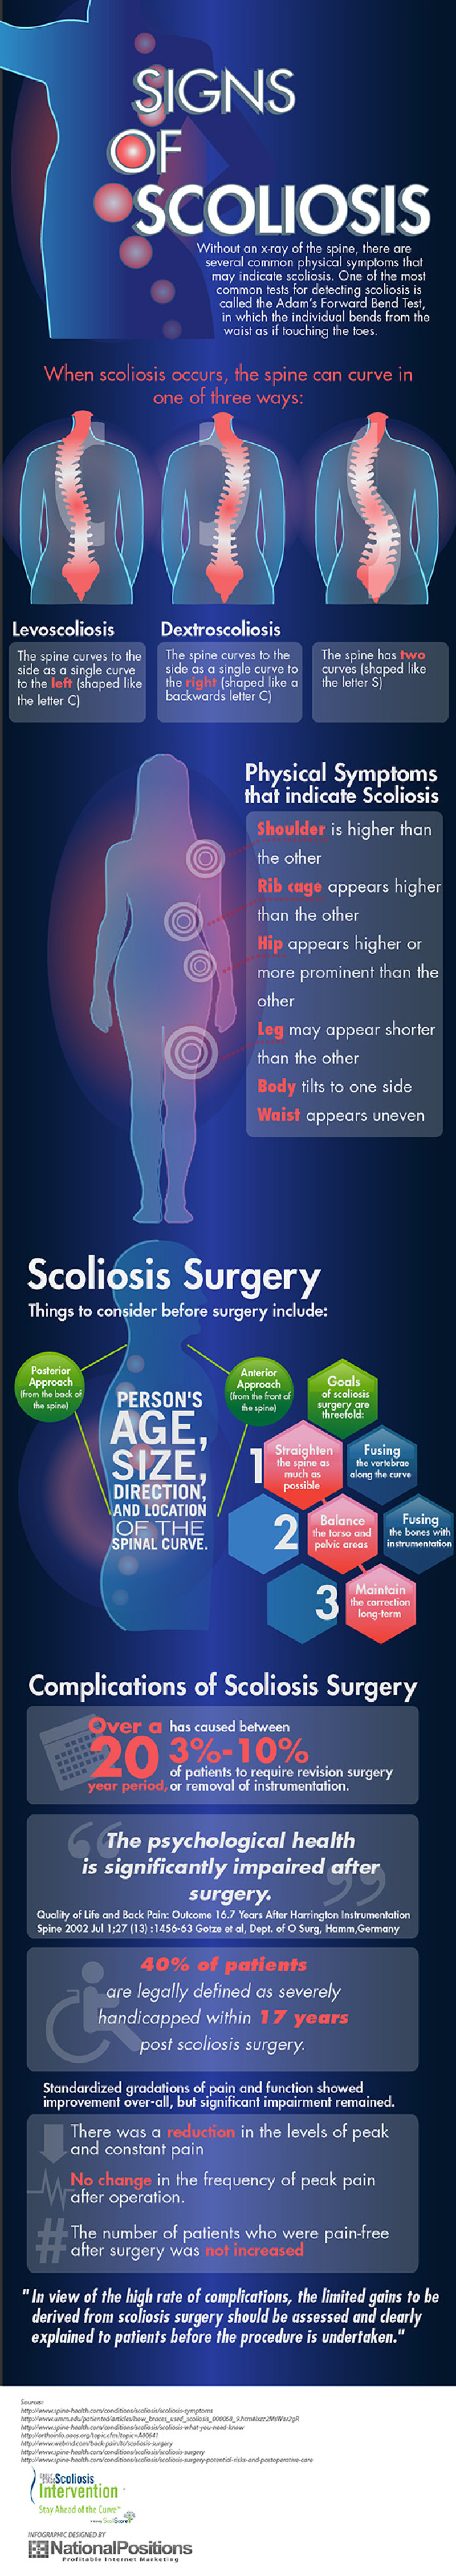 Signs of Scoliosis